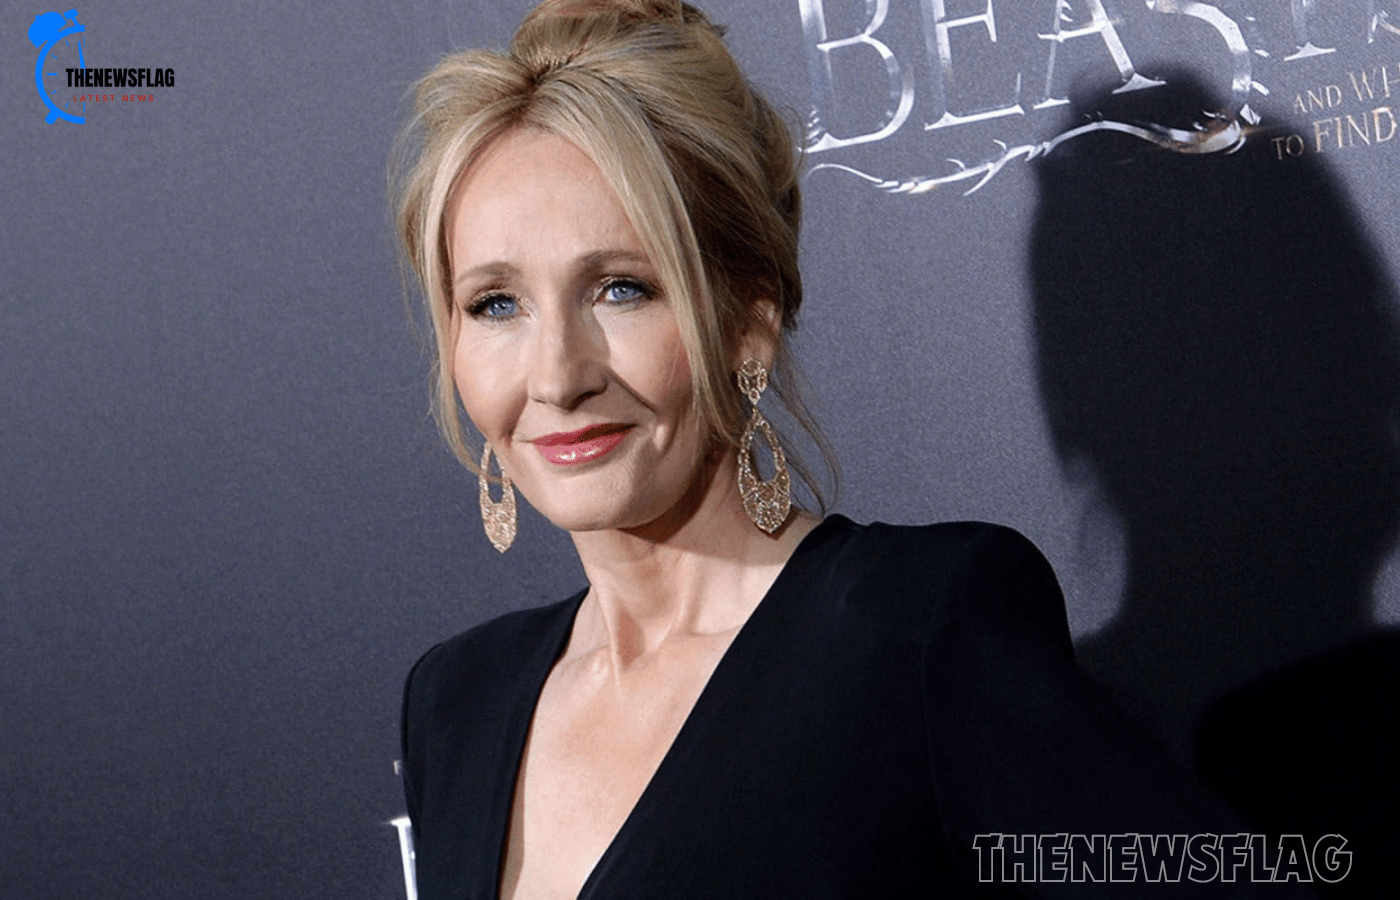 JK Rowling is under fire for her "transphobic" remarks and for saying that Nazis never set books on transgender health on fire.